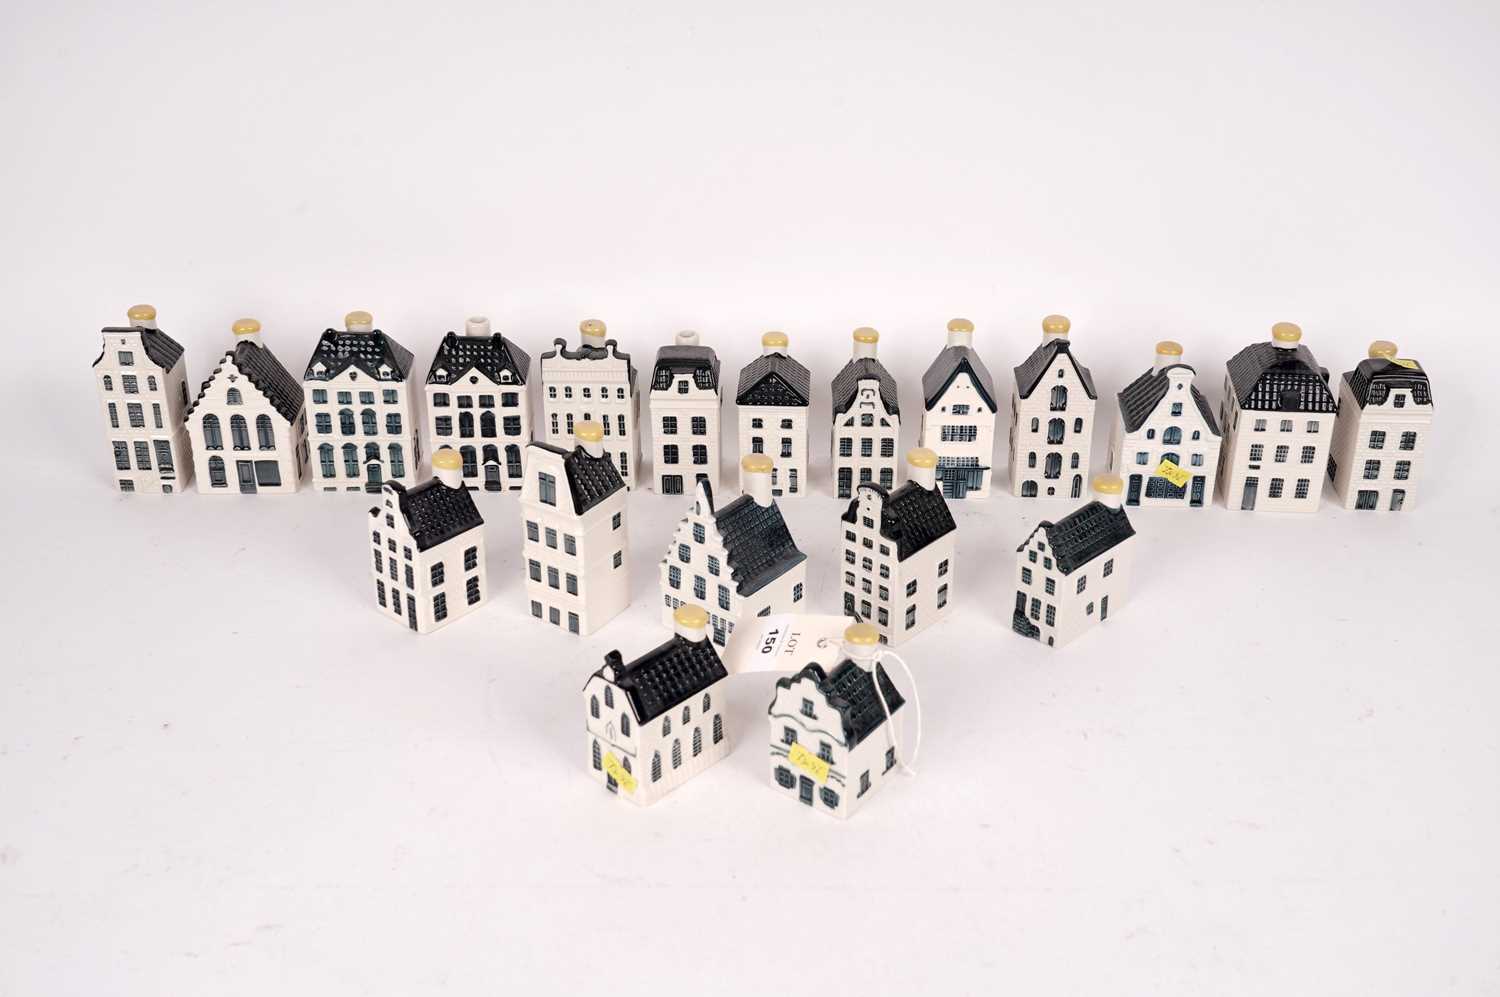 A selection of KLM delft decorative ceramic house decanters